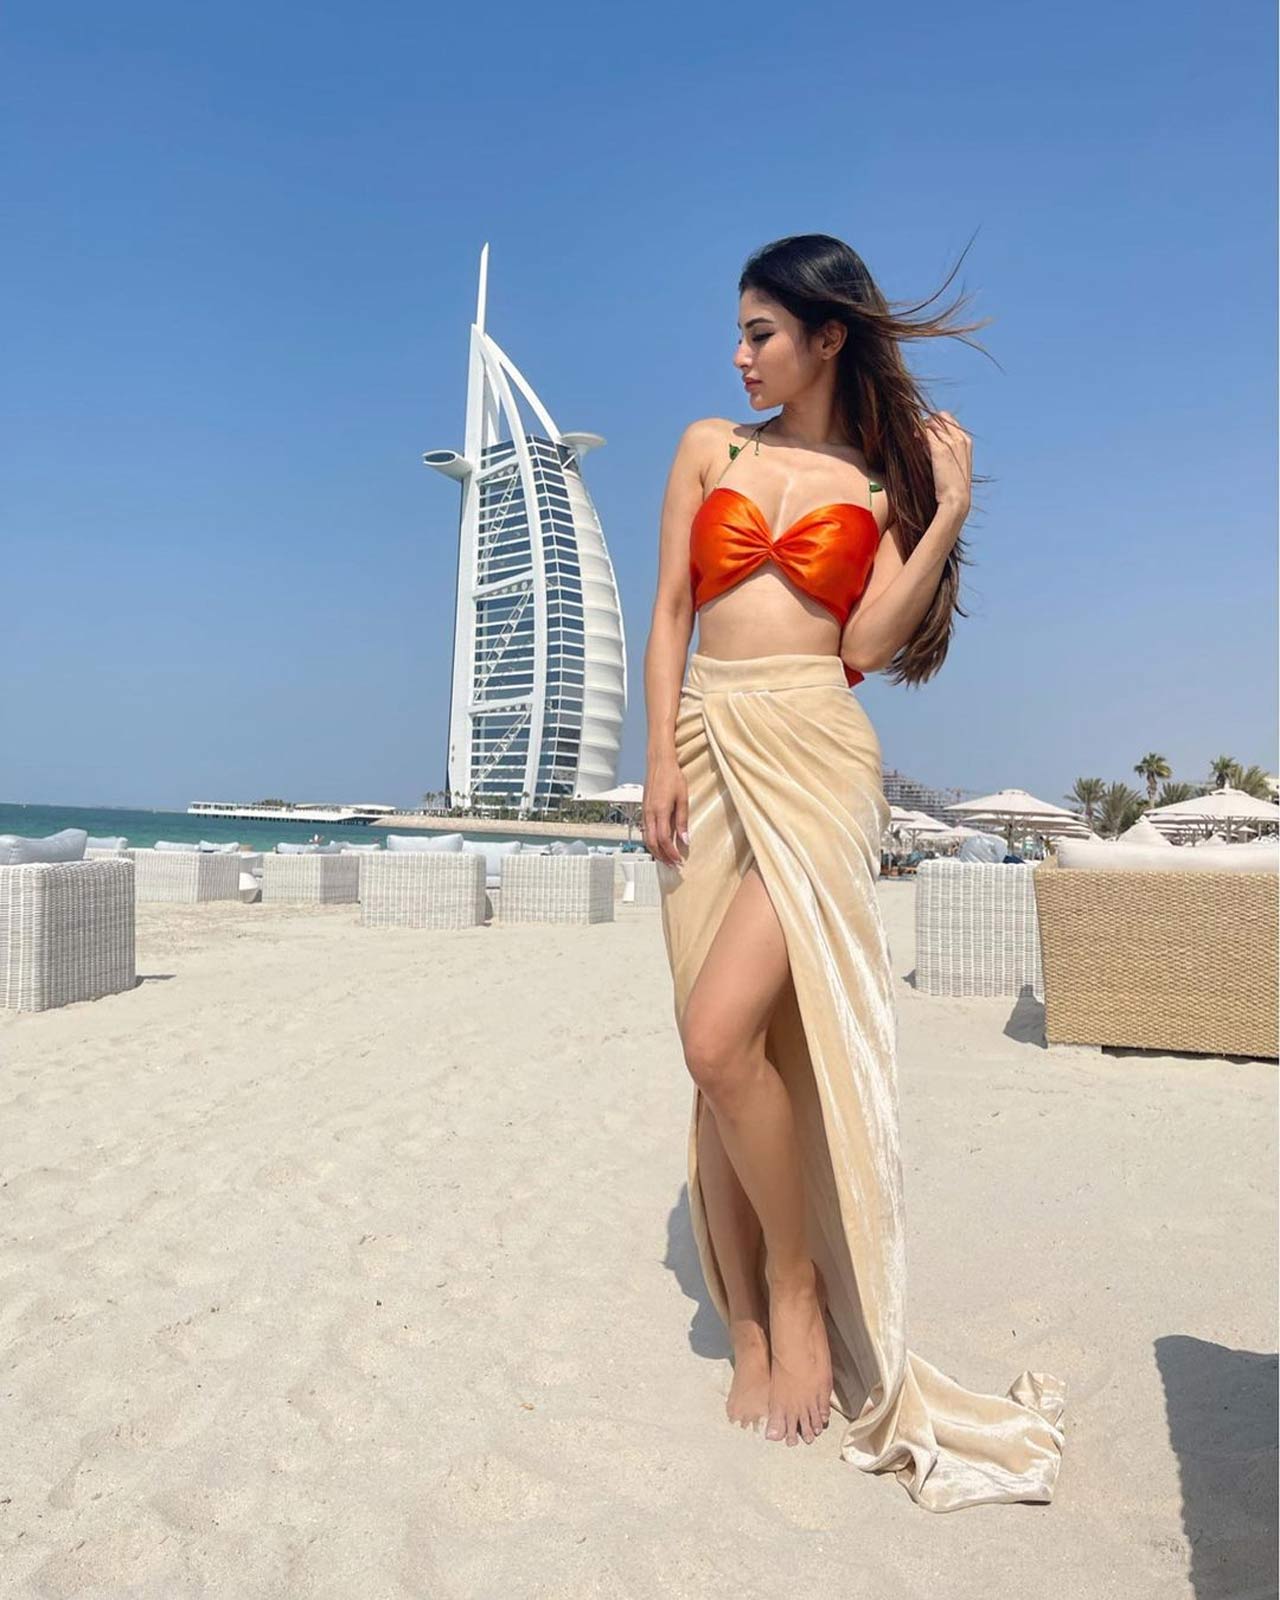 Pooja Hegde is chilling by the pool on the beautiful land of Maldives. The actress has shared her 'extraordinary experiences' from Maldivian vacation on social media, giving us all a glimpse of her 'beach bum' vibe. The actress has upcoming projects that include Thalapathy Vijay's 'Beast', Salman Khan's 'Bhaijaan', 'Cirkus' opposite Ranveer Singh, 'Acharya' with Chiranjeevi and Ram Charan, 'Radhe Shyam' opposite Prabhas and 'SSMB28' opposite Mahesh Babu.